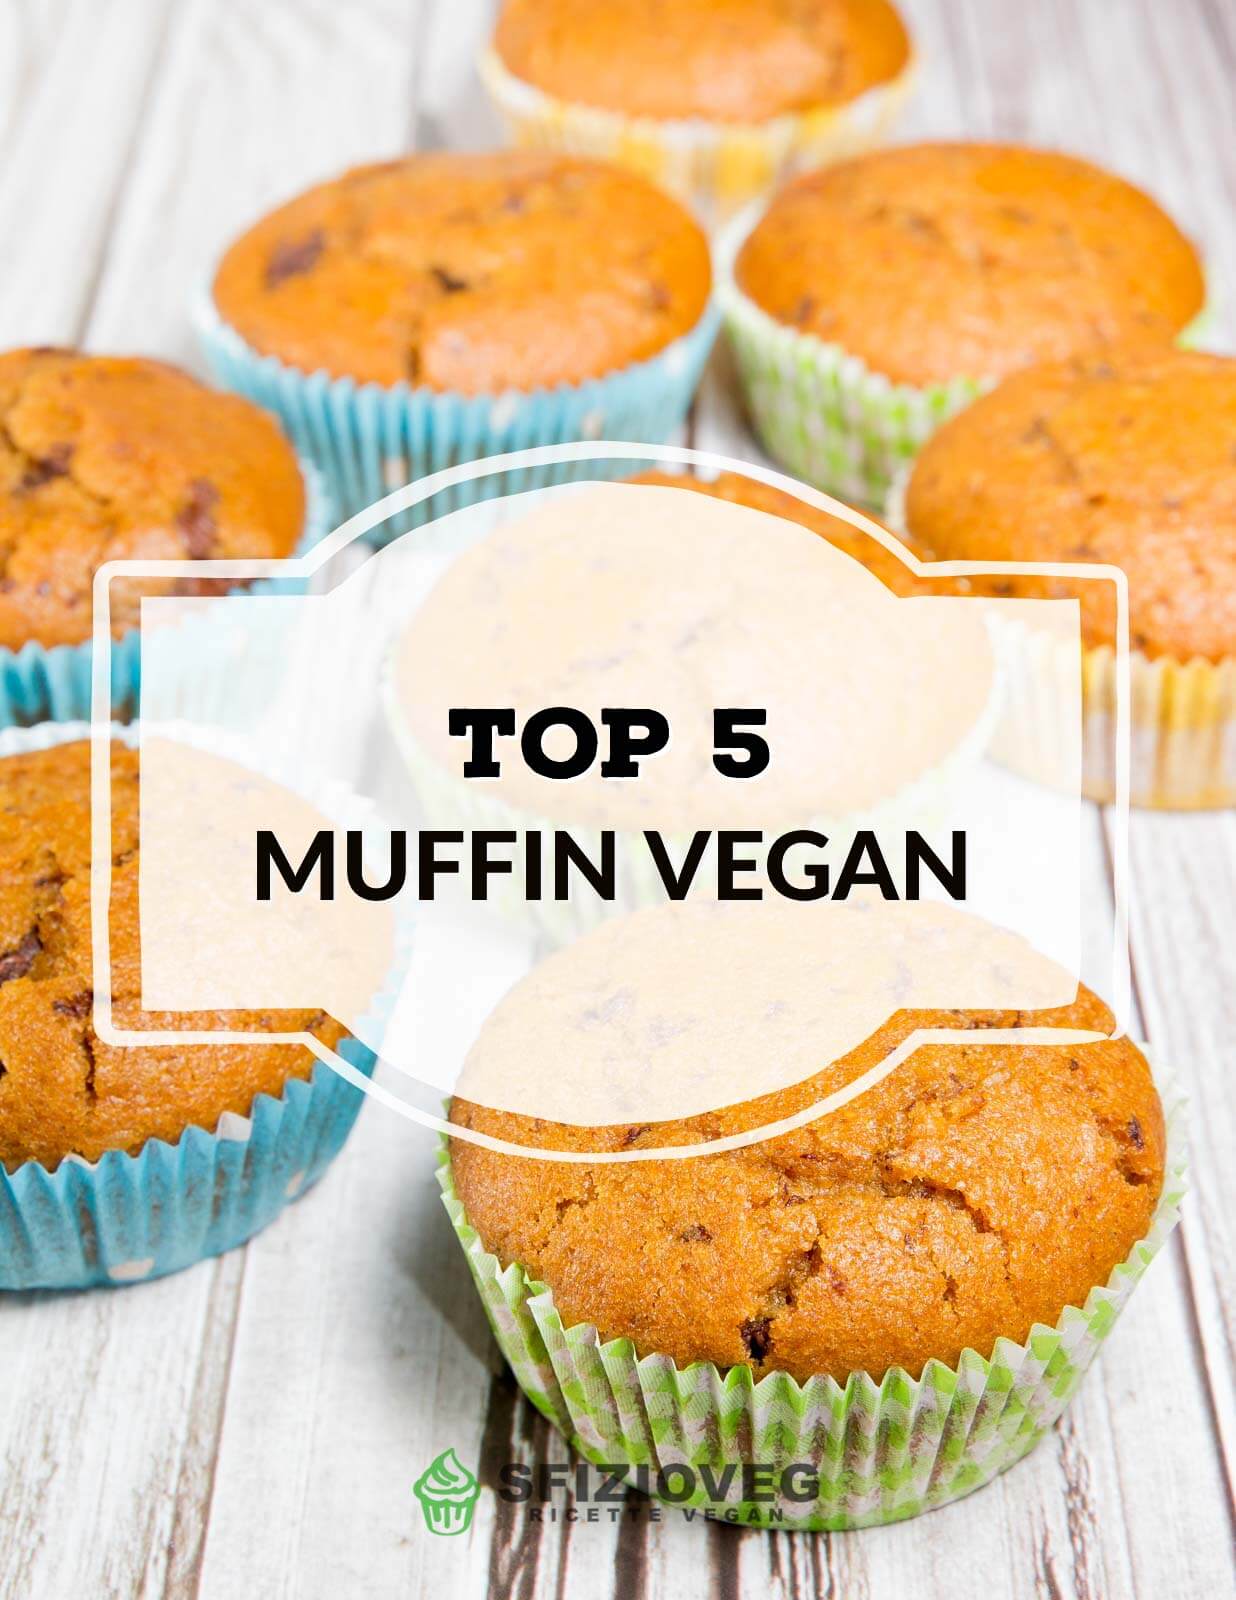 TOP 5 RICETTE MUFFIN